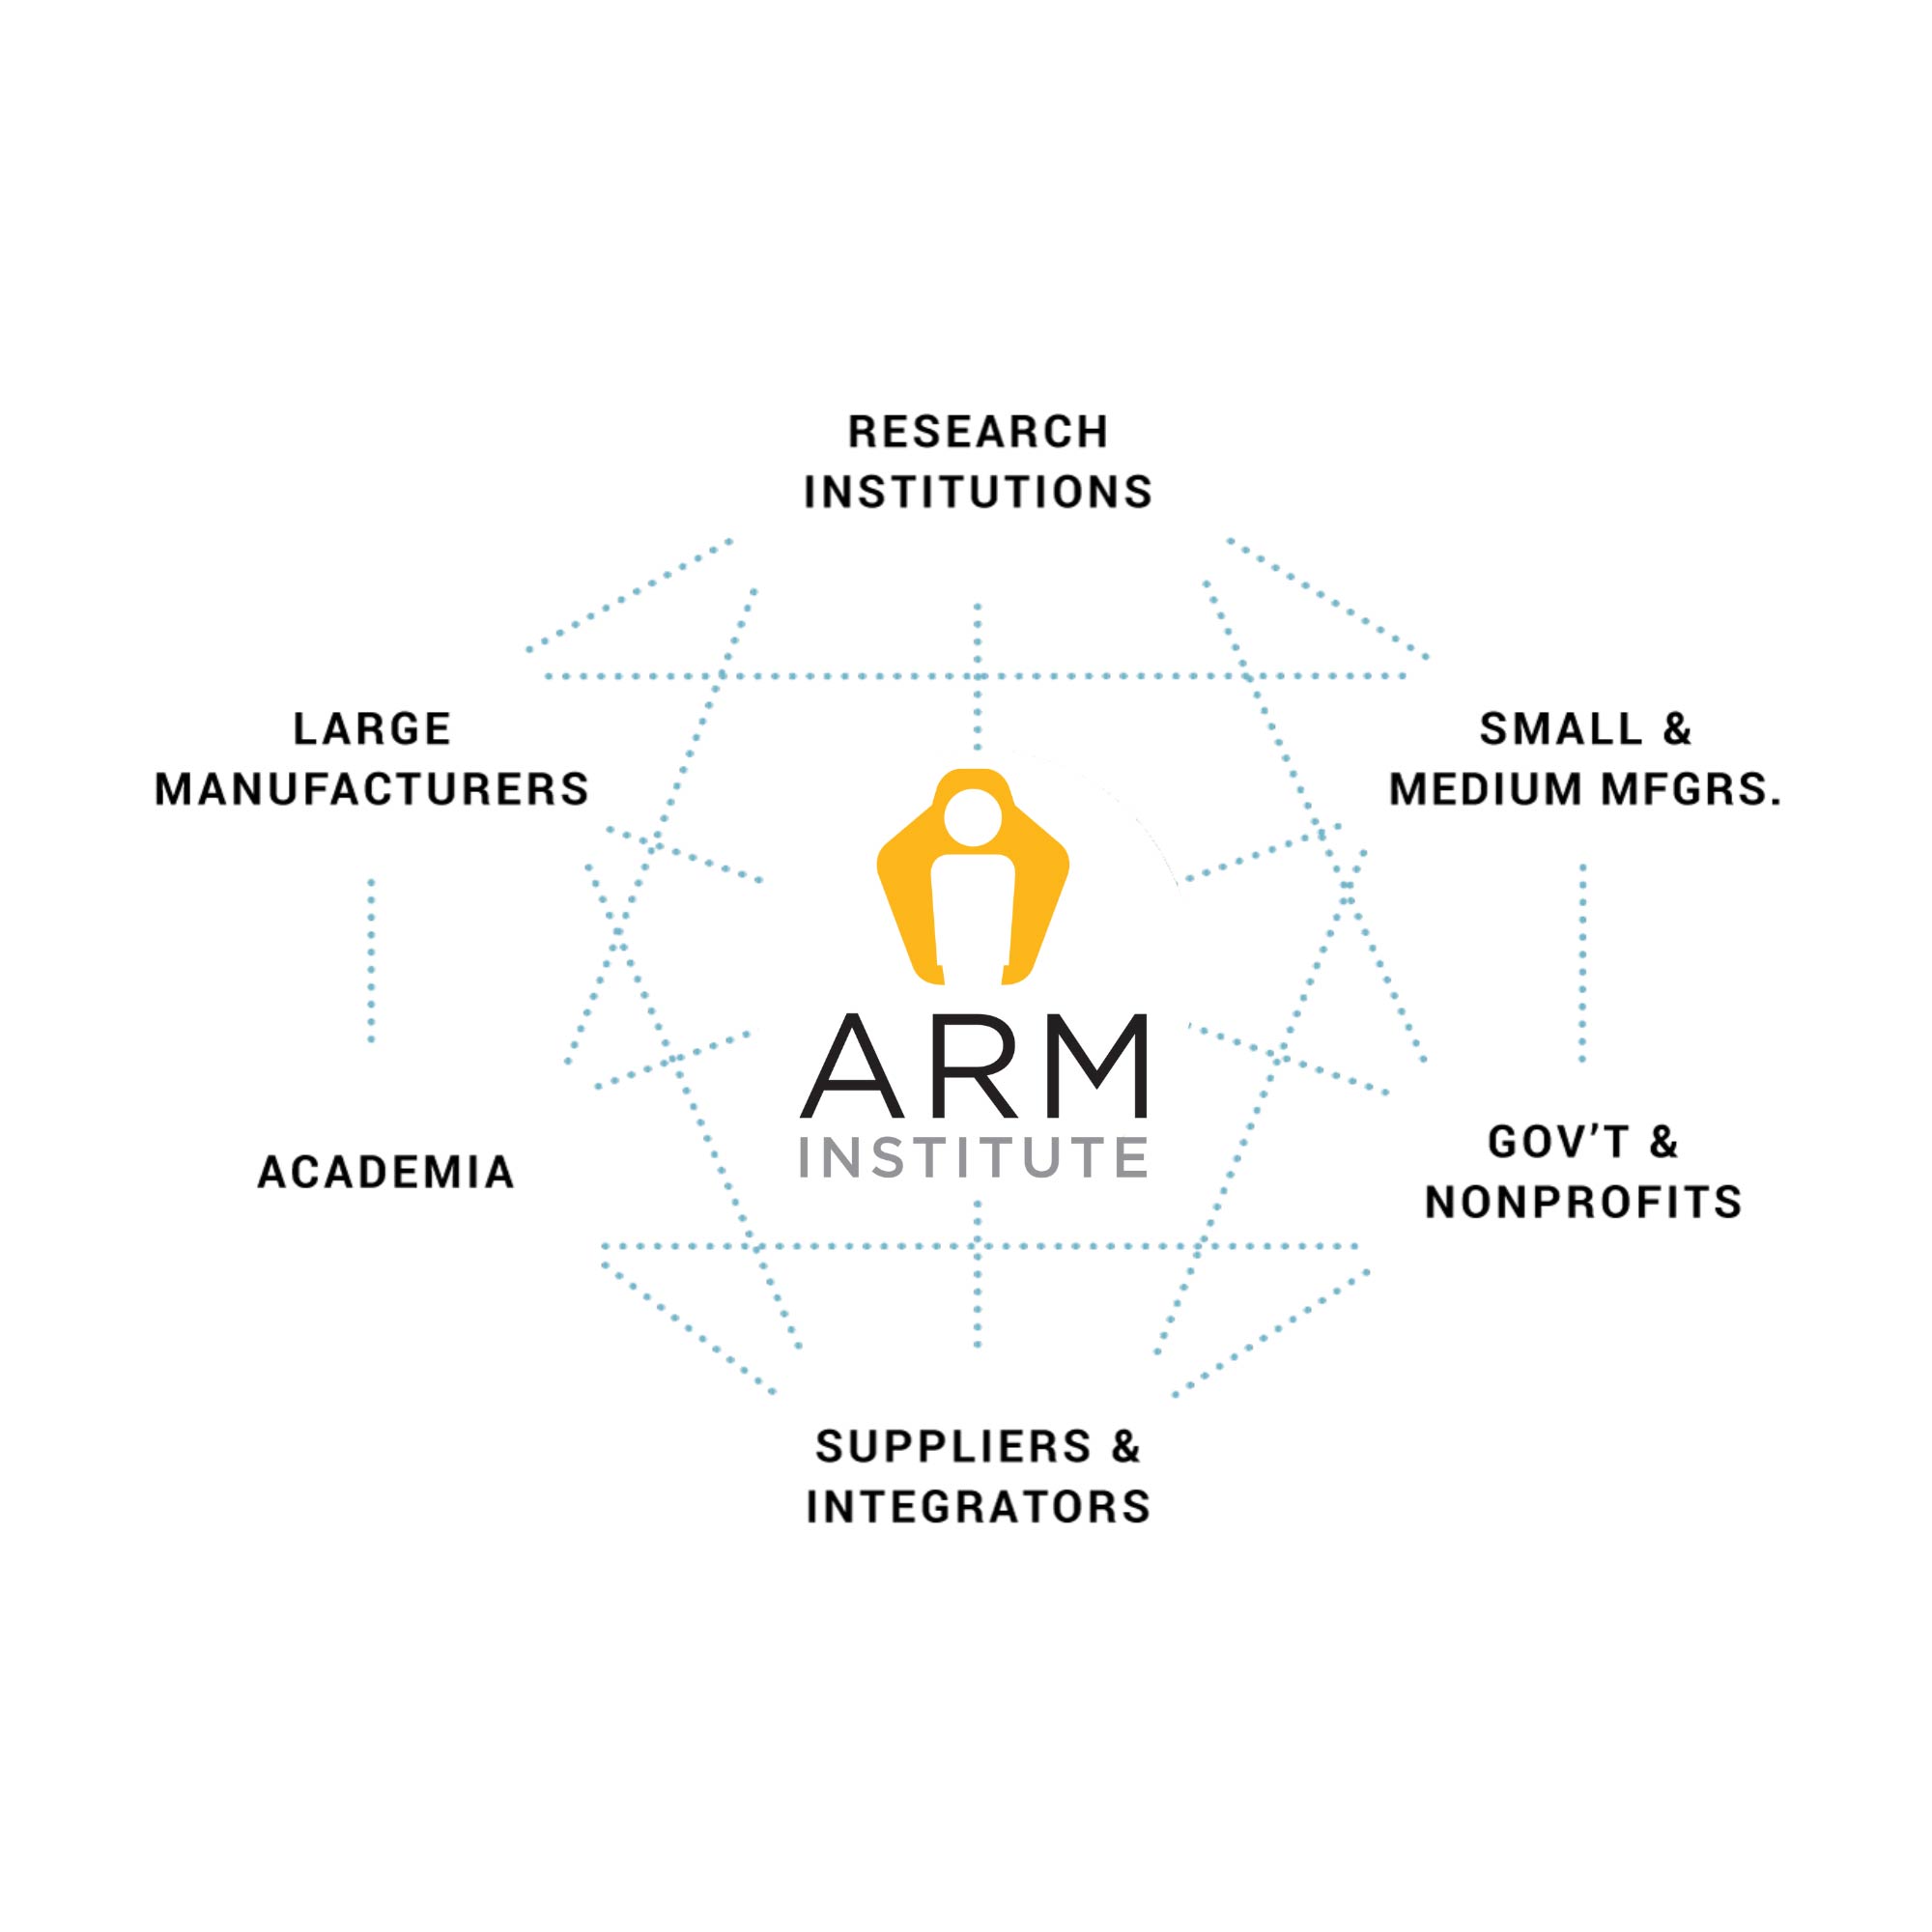 Image that shows the ARM Institute logo connected to large and small manufacturers, academic institutions, start ups, and others